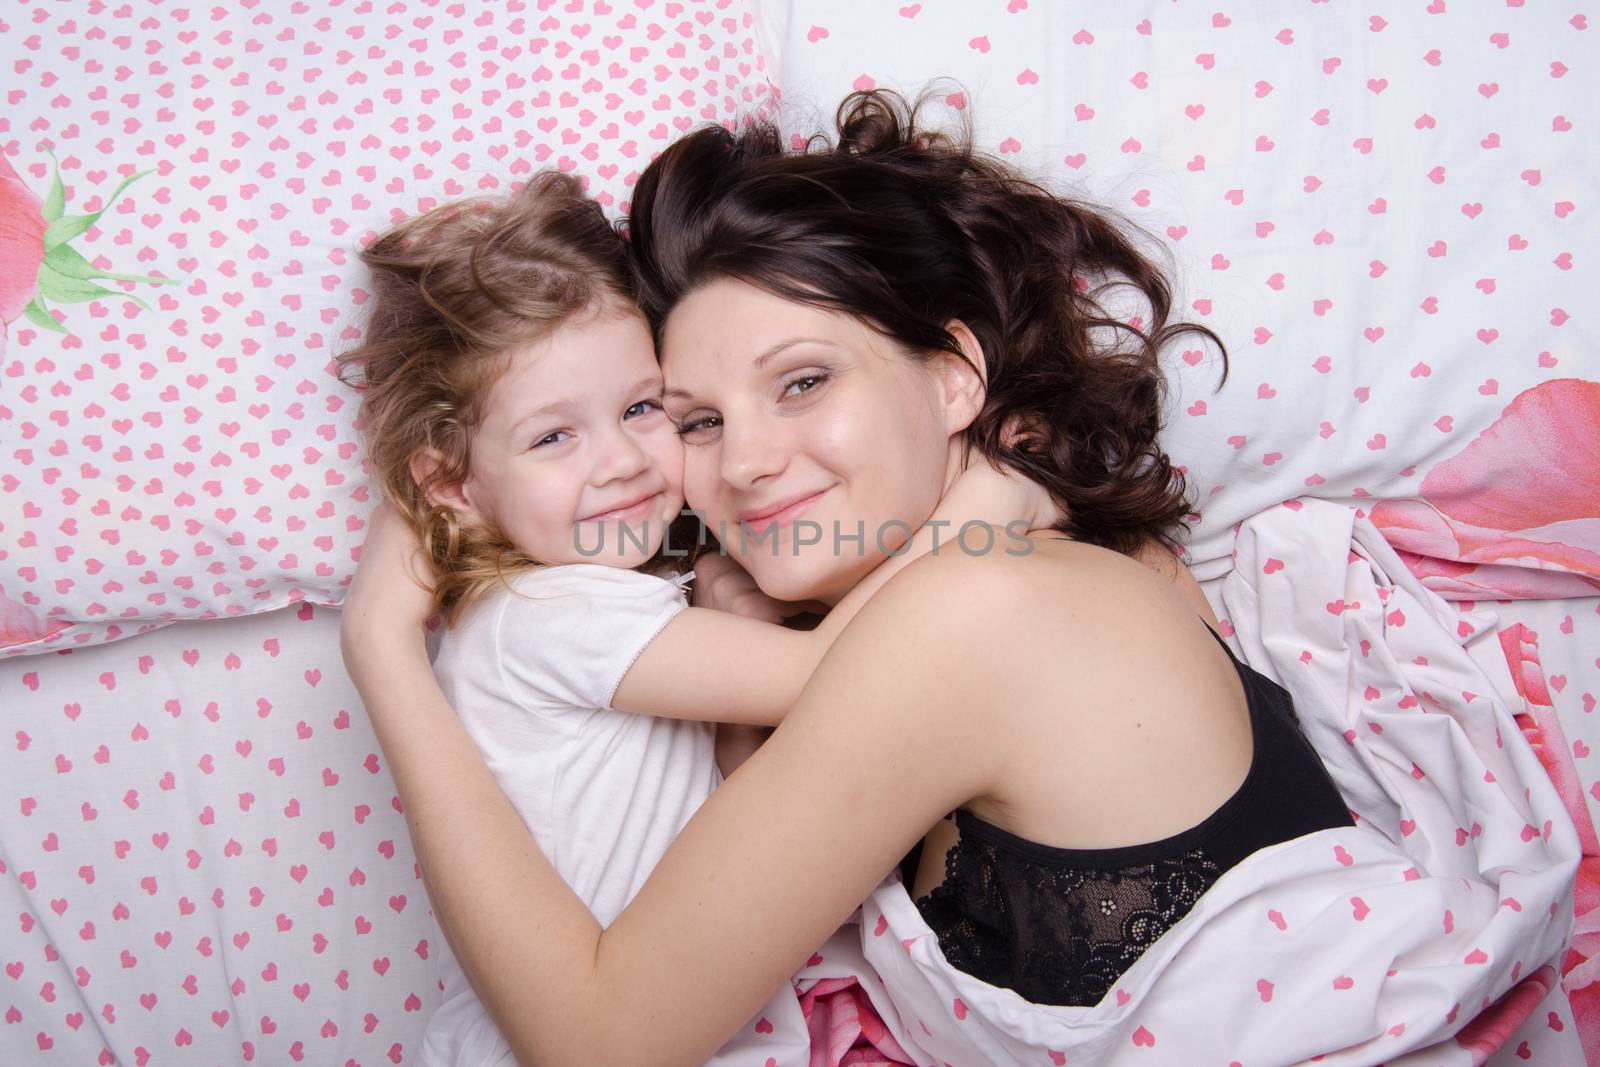 Mum embraces daughter lying in bed by Madhourse